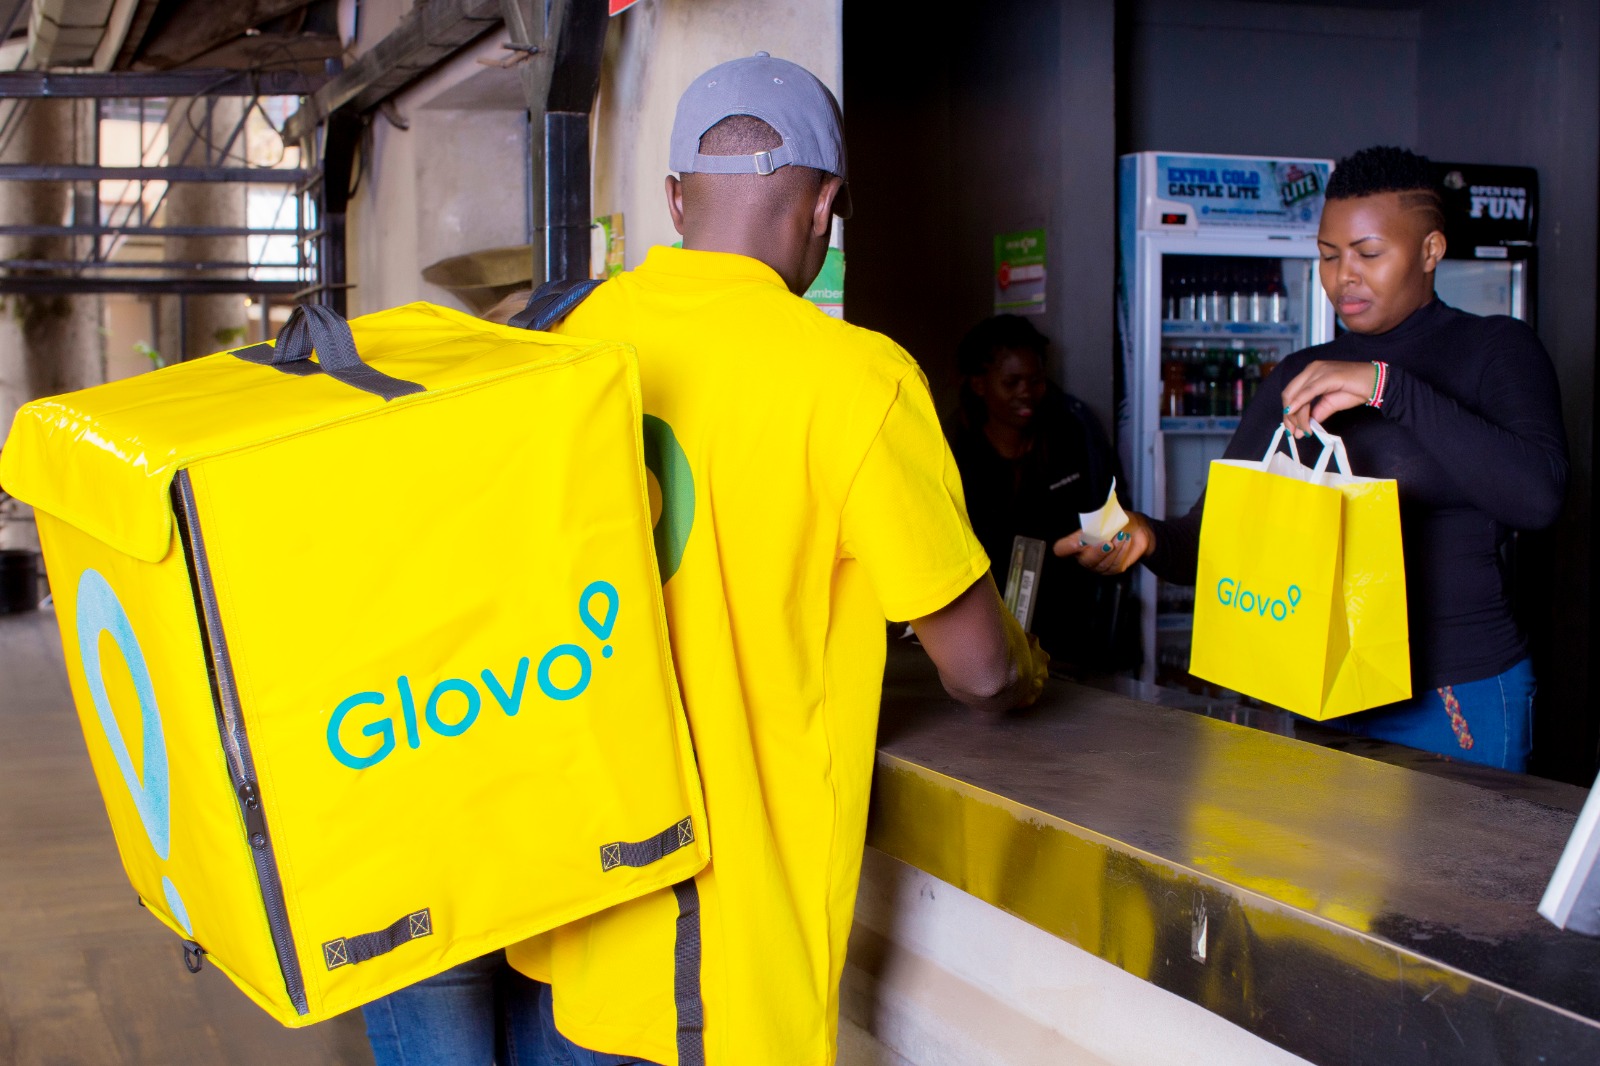 Services available on Glovo Local include digital and operational solutions for their own channels and stores